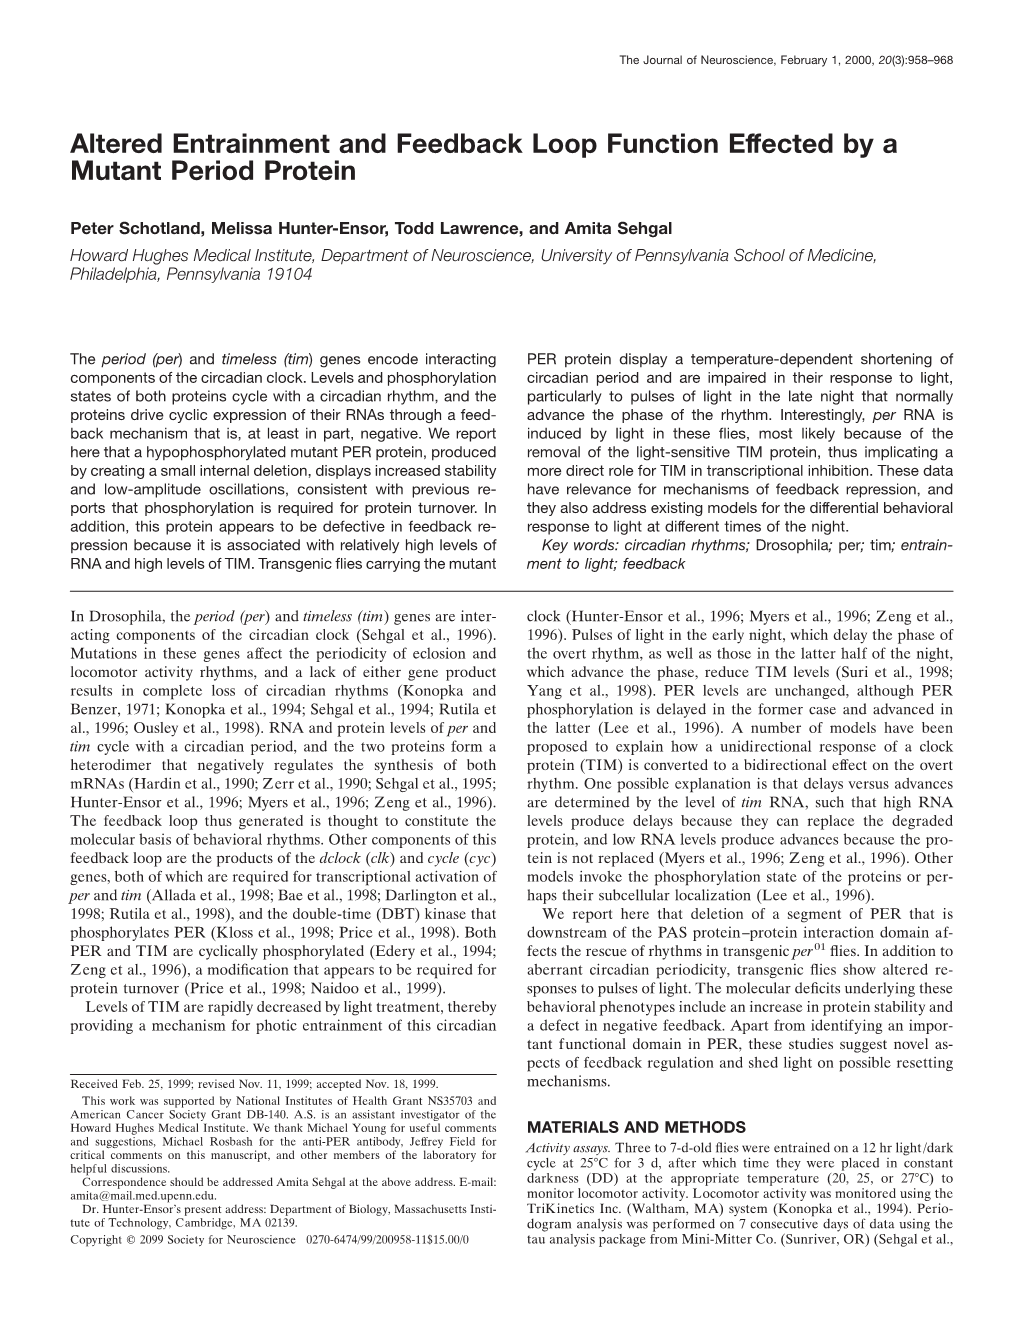 Altered Entrainment and Feedback Loop Function Effected by a Mutant Period Protein